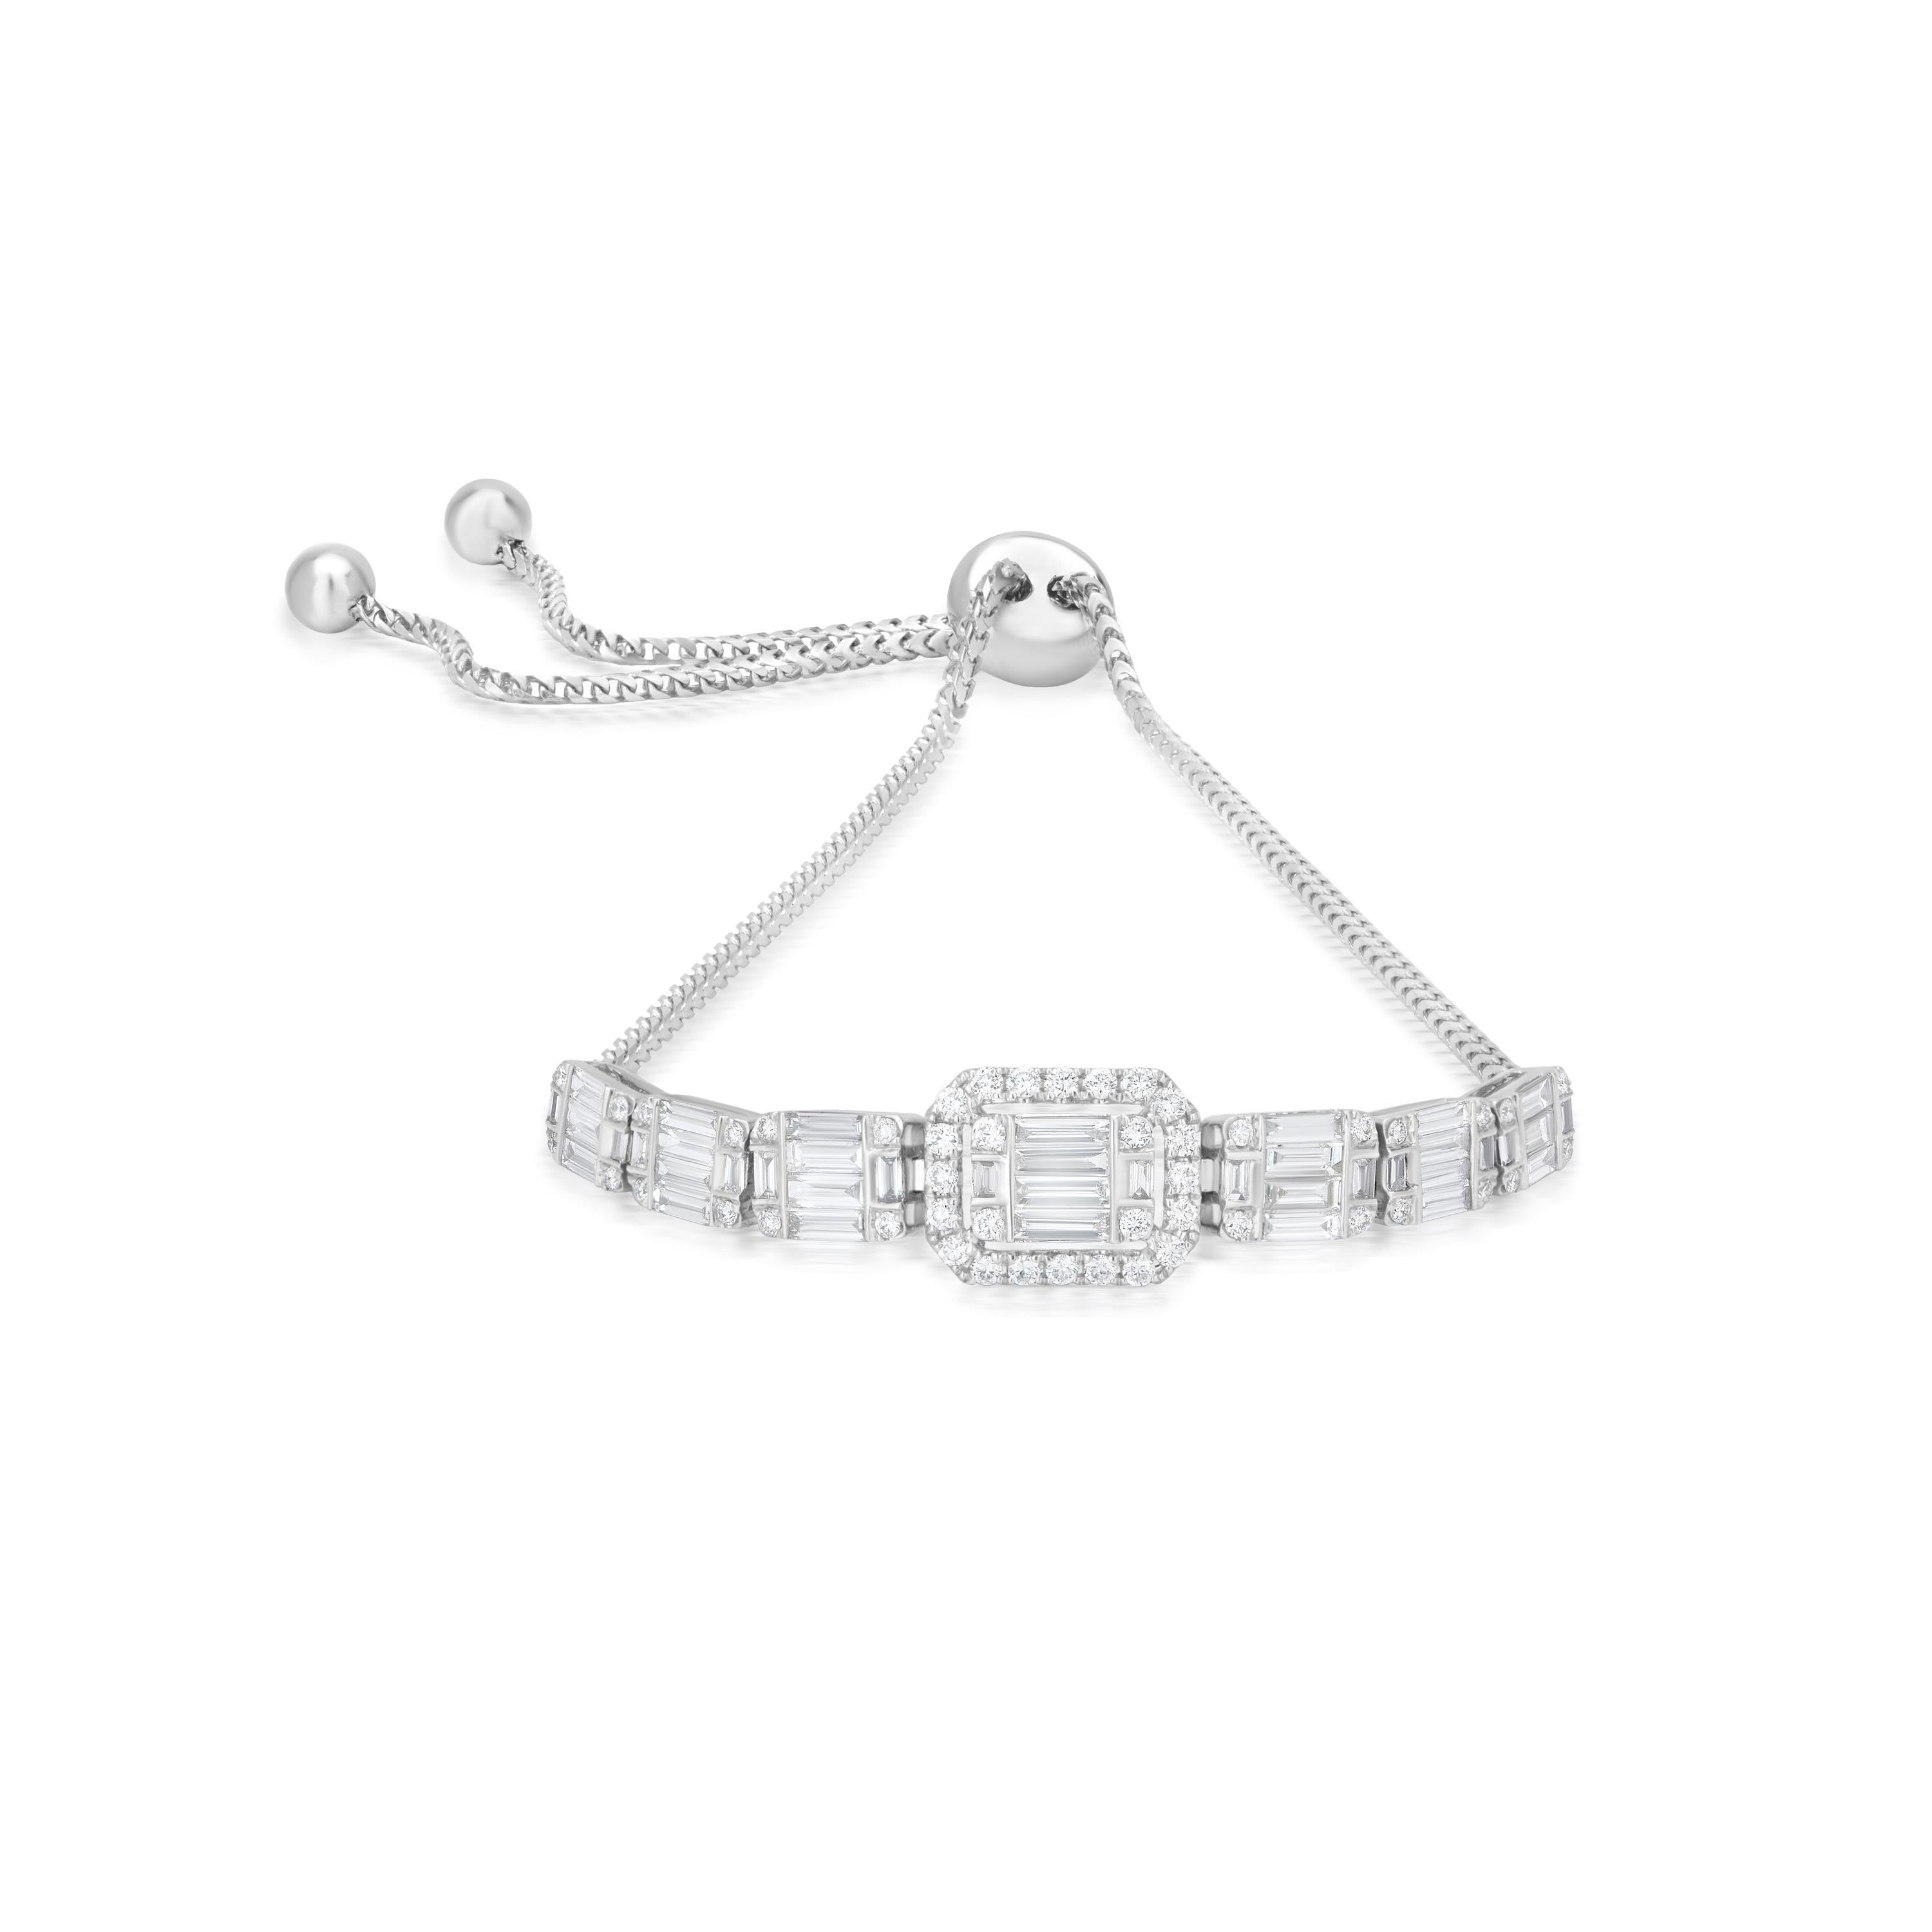 This Luxle 1.60 Ct. T.W. Diamond Bolo Bracelet in 18k White Gold  sparkles with diamond clusters. Dazzling to fit most wrists it features a baguette and round diamond cluster at its center enclosed by a diamond halo. The central cluster is flanked